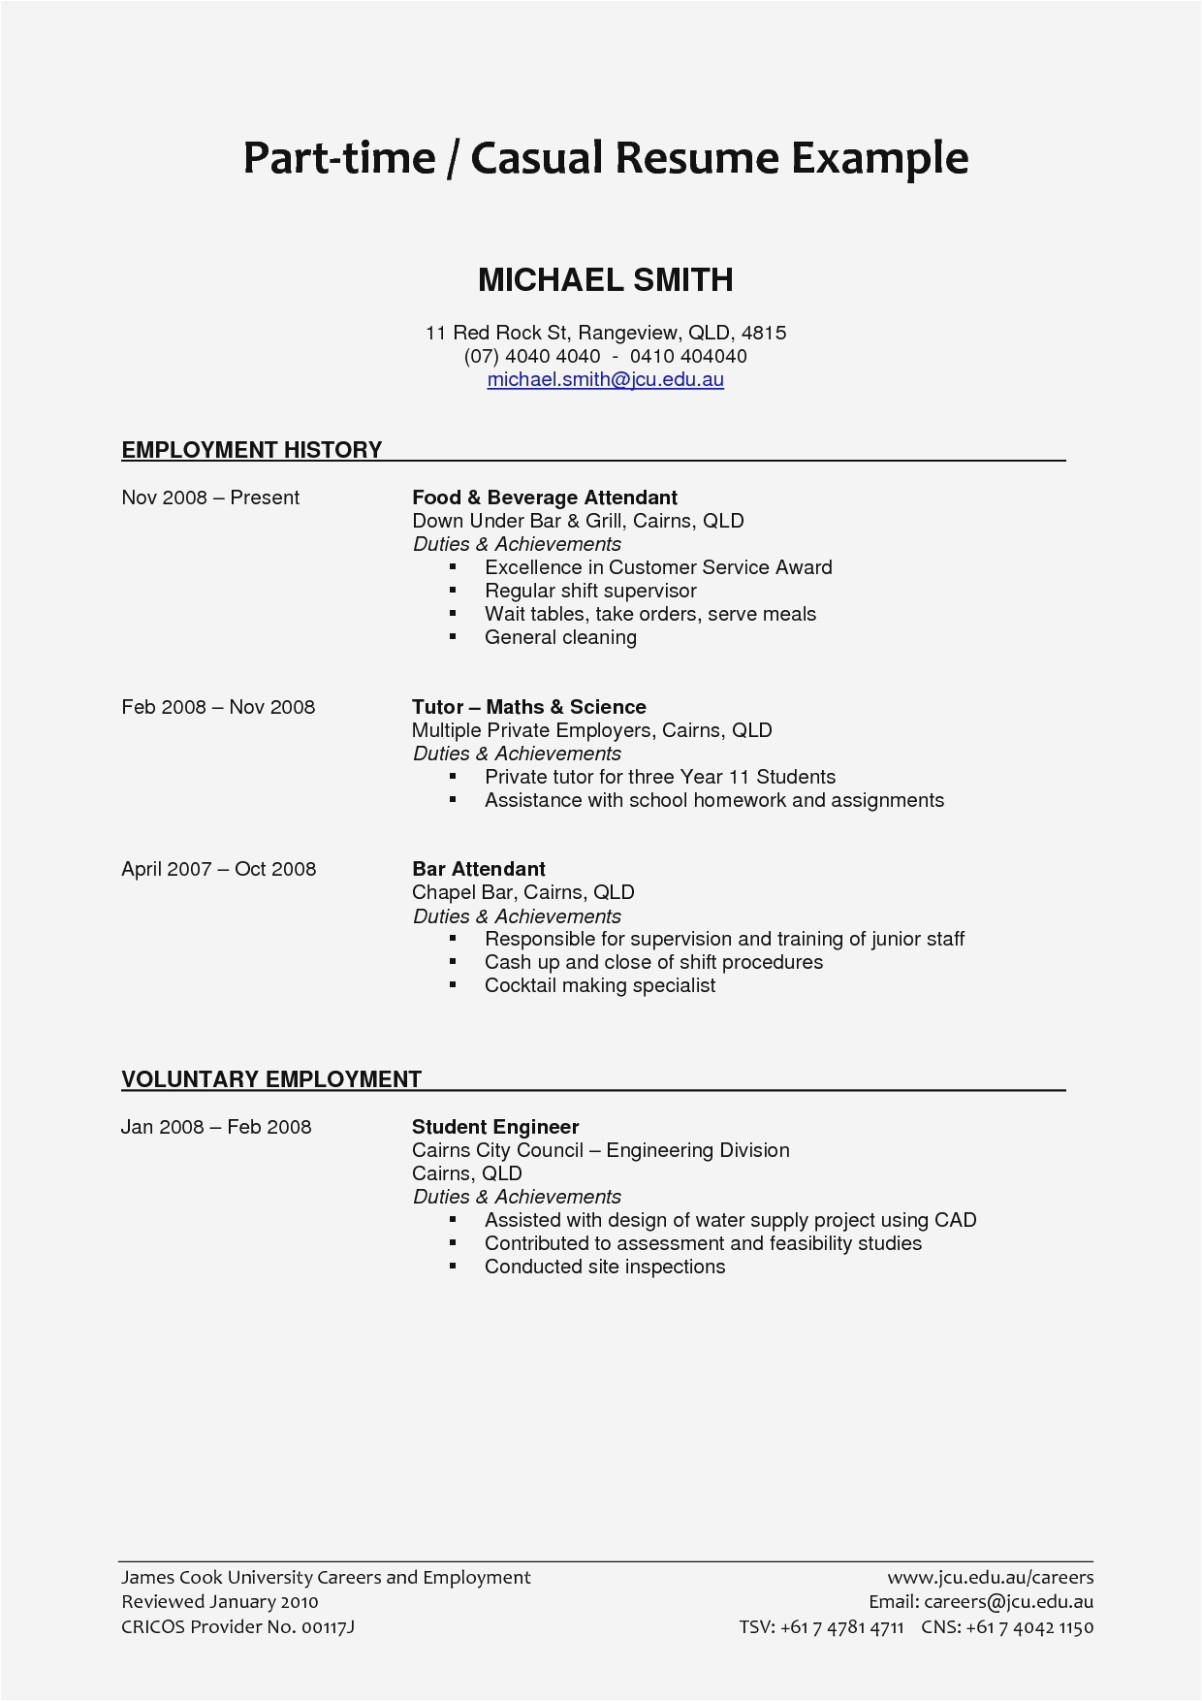 basic resume examples for part time jobs